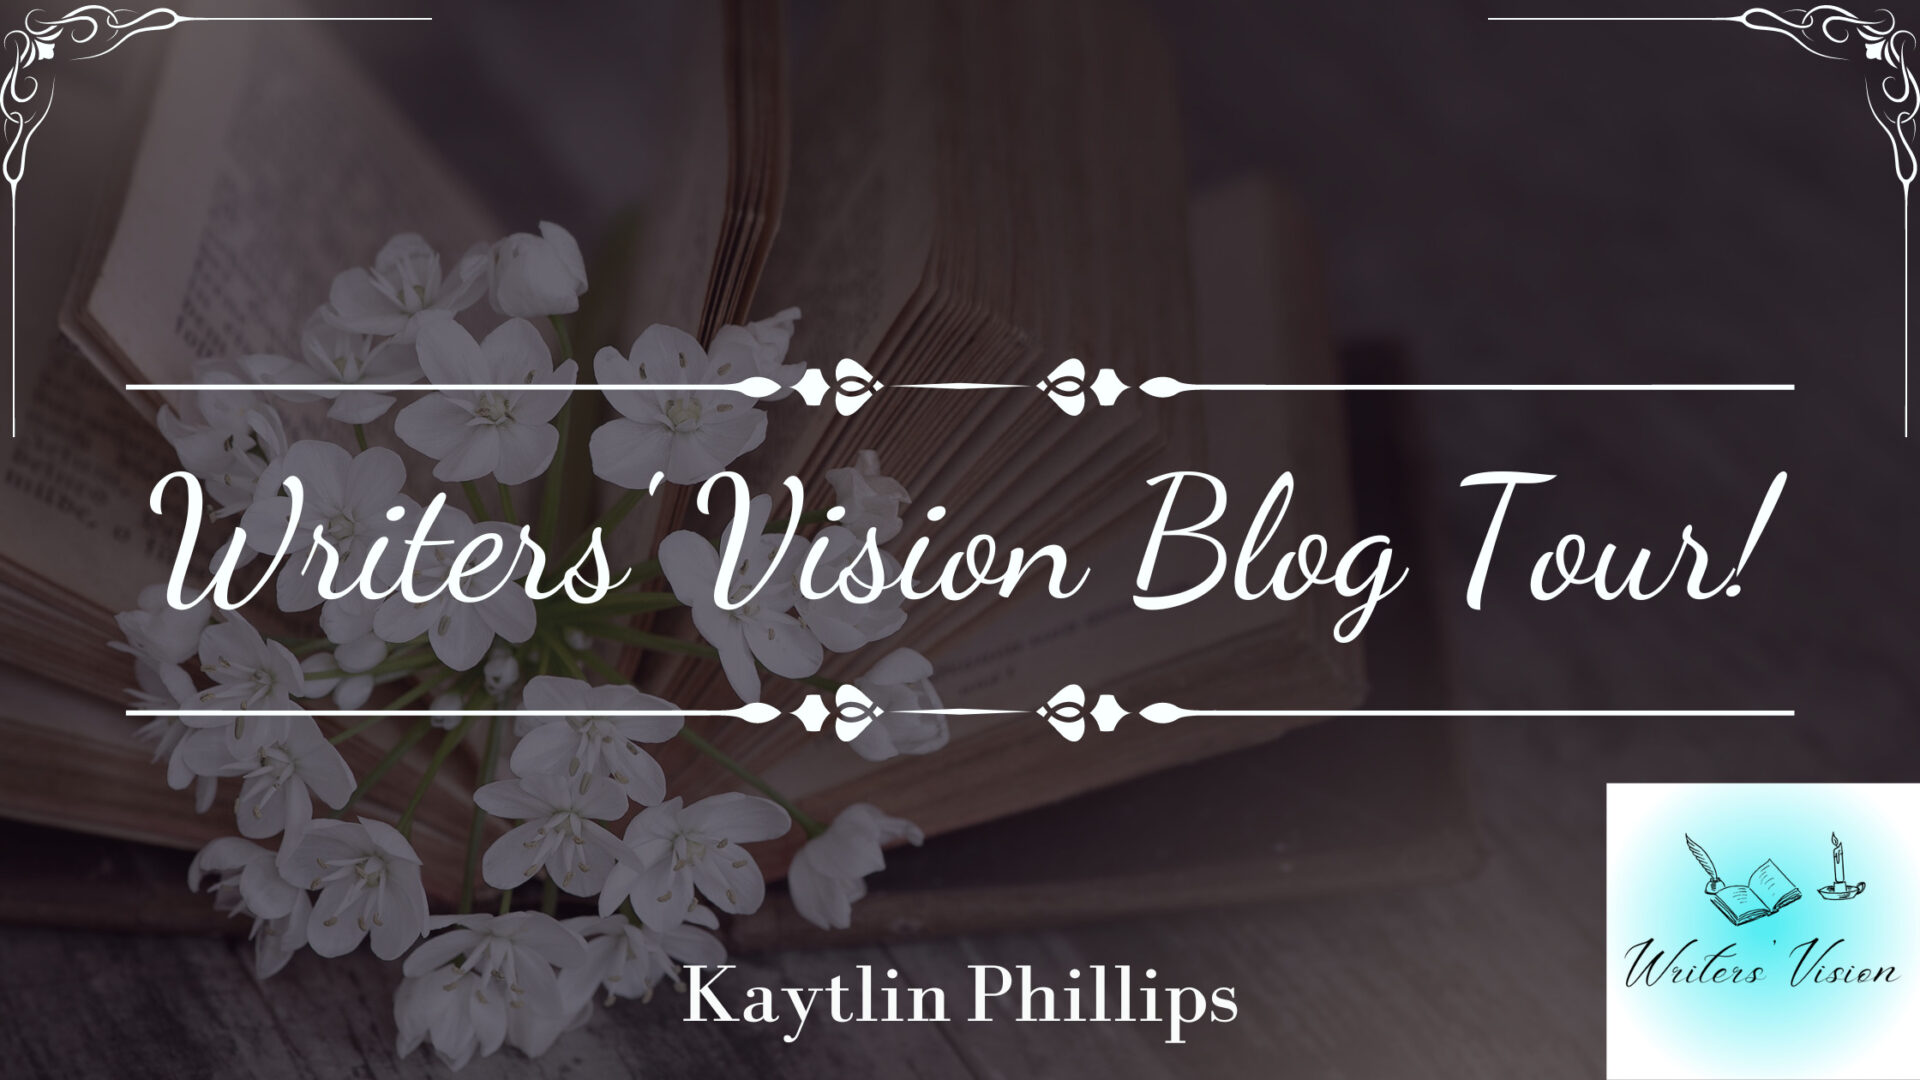 Writers’ Vision Blog Tour: Made for Connection (Guest Post)